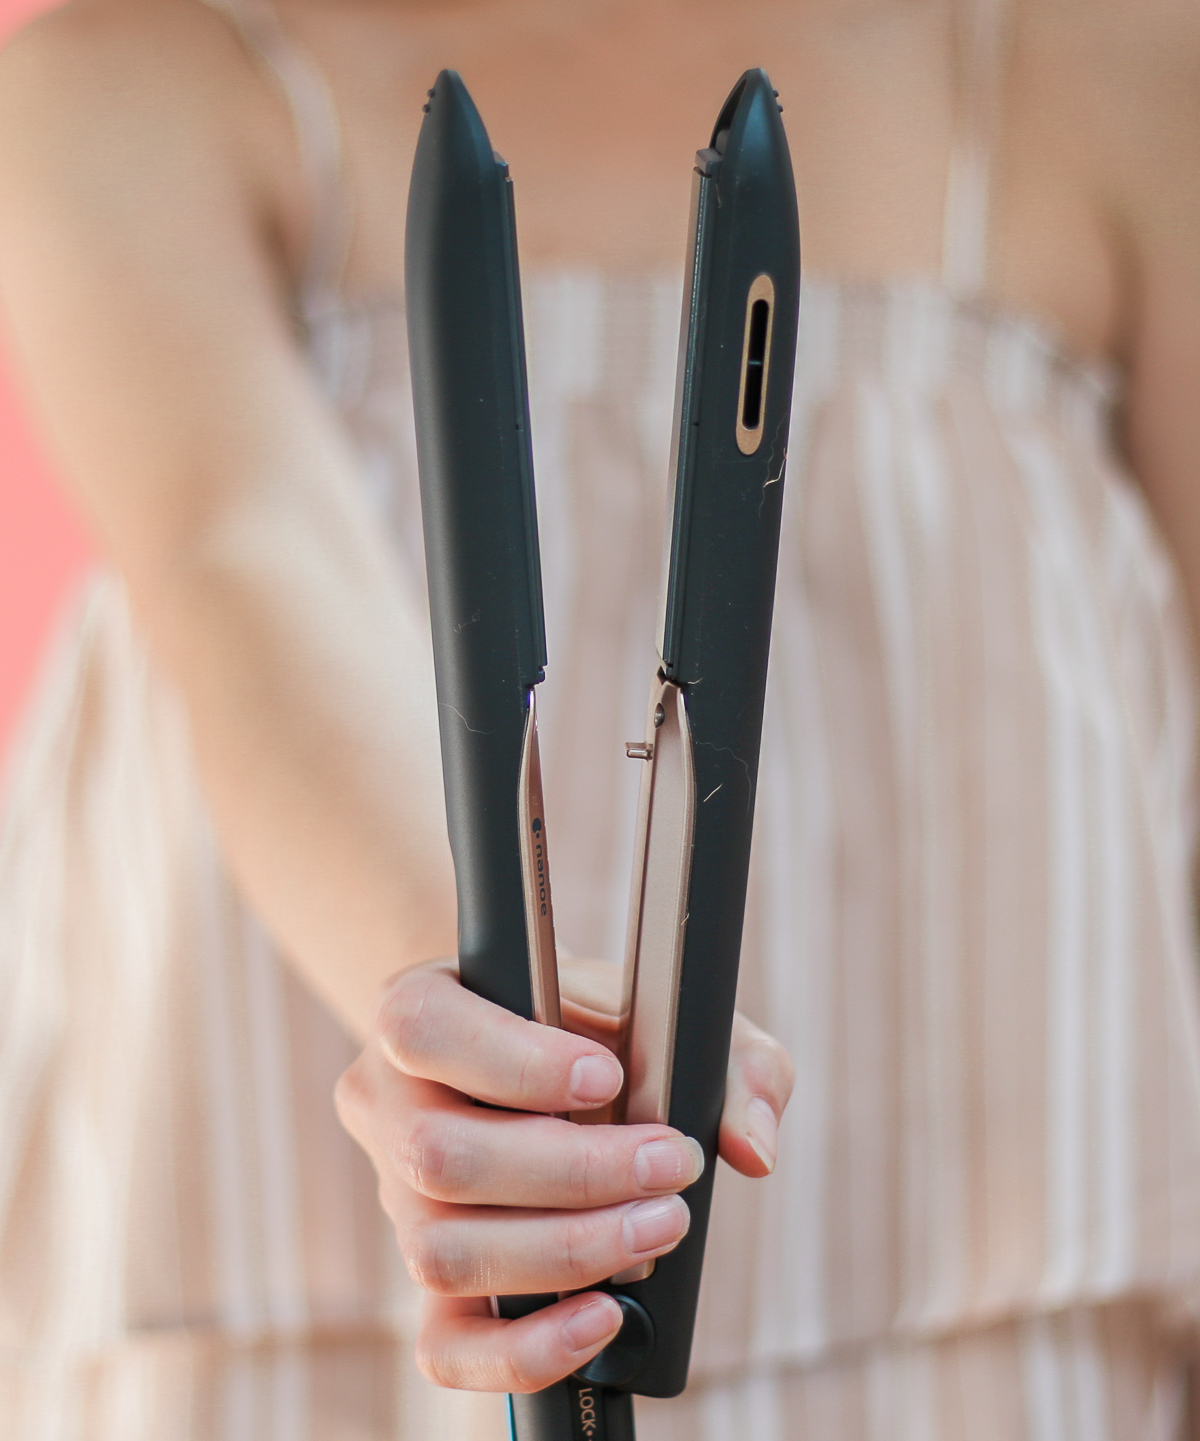 How To: Soft Flat Iron Curls with the Best Flat Iron for Thick Hair by beauty blogger Stephanie Ziajka from Diary of a Debutante, hair straightener styling tricks, soft flat iron curls hair tutorial, Panasonic nanoe Flat Iron review, Panasonic nanoe straightener review